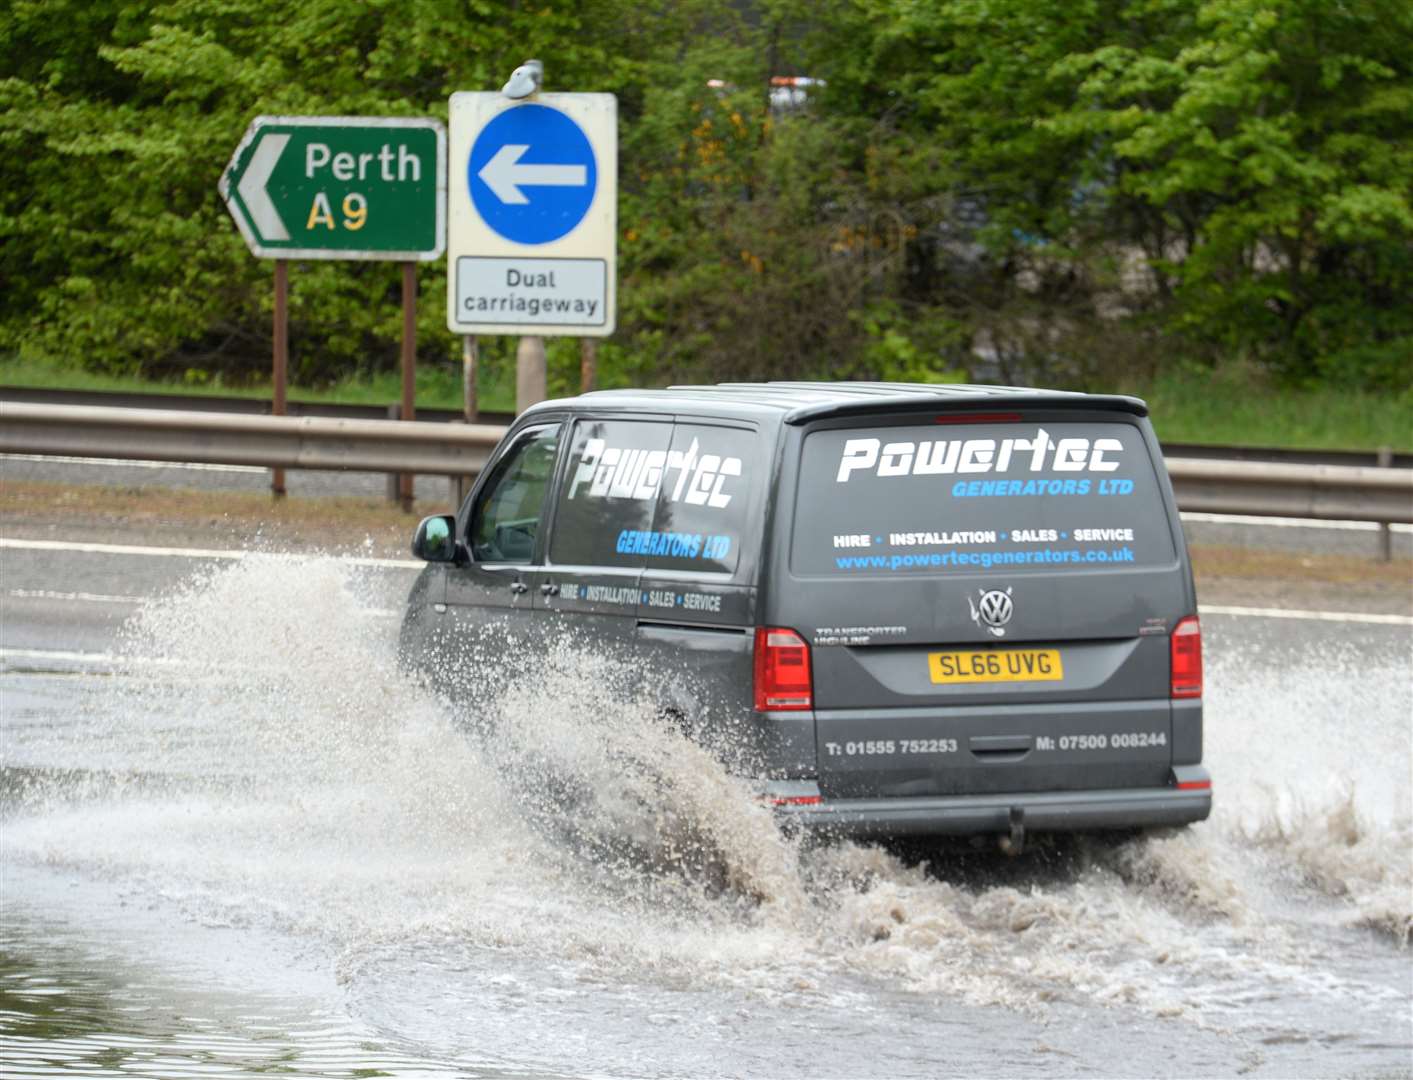 Previous flooding on slip road to the A9. Picture: Gary Anthony.